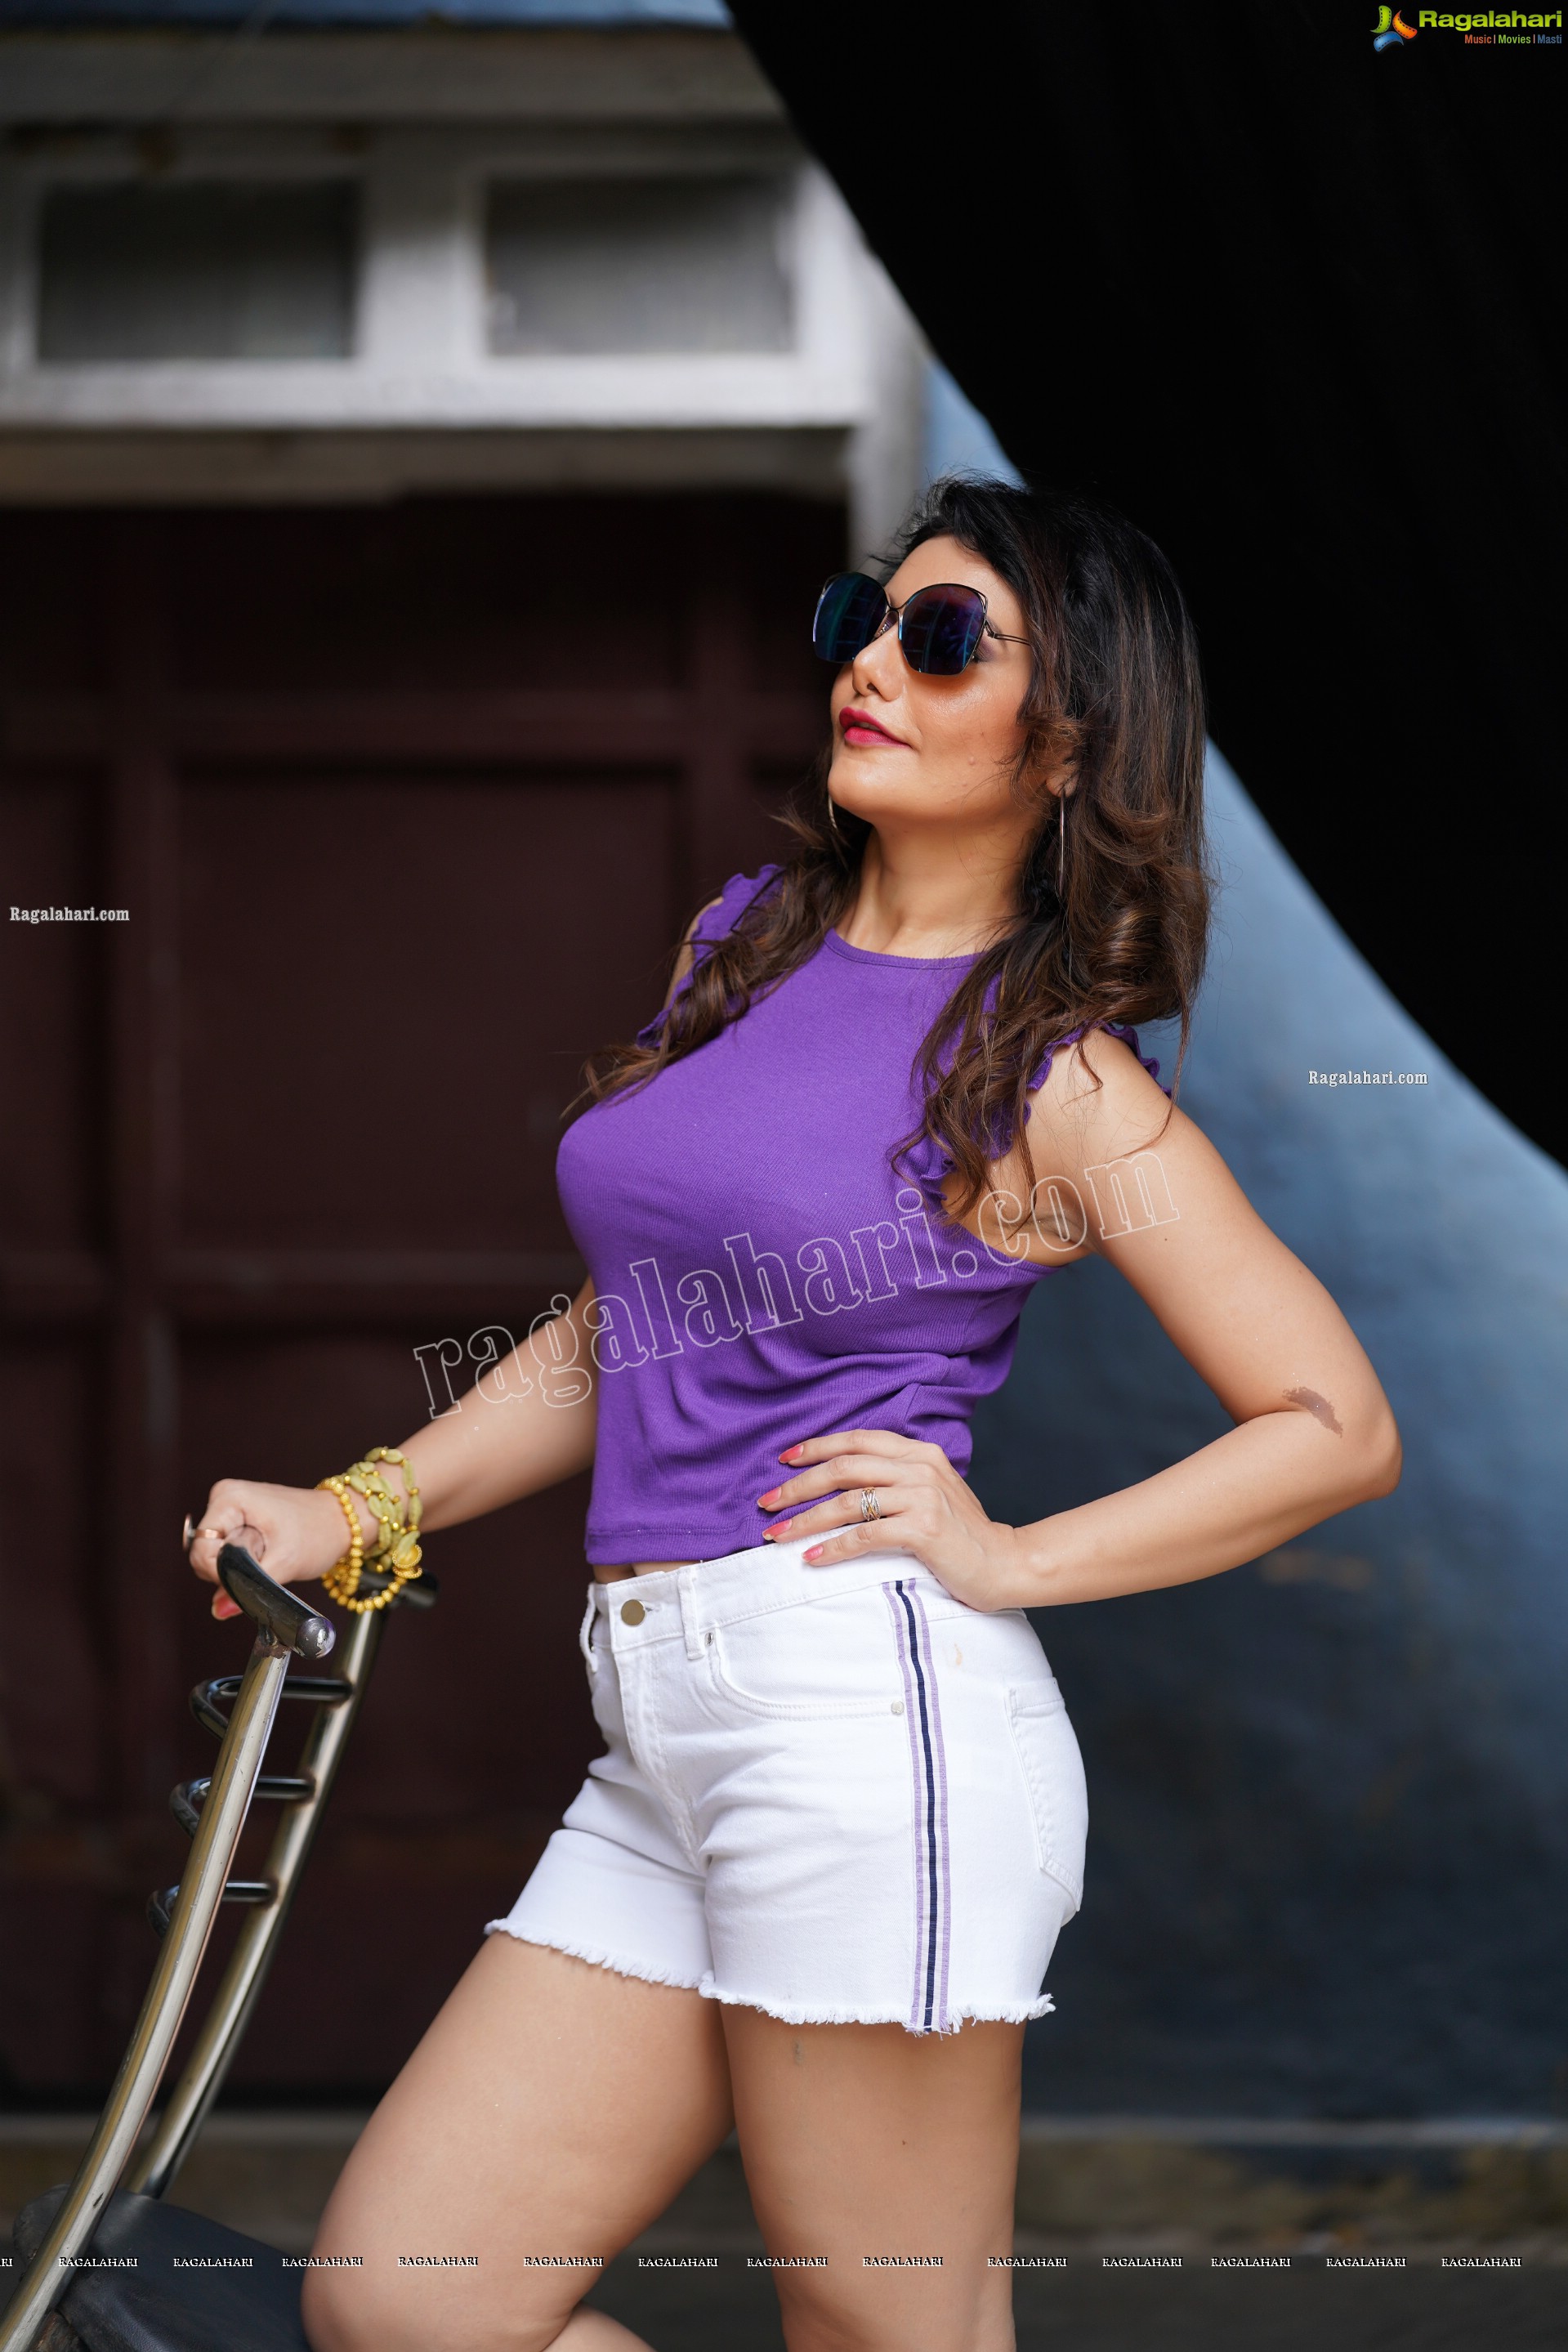 Nisha Singh Rajput in Purple Crop Top and White Shorts, Exclusive Photoshoot